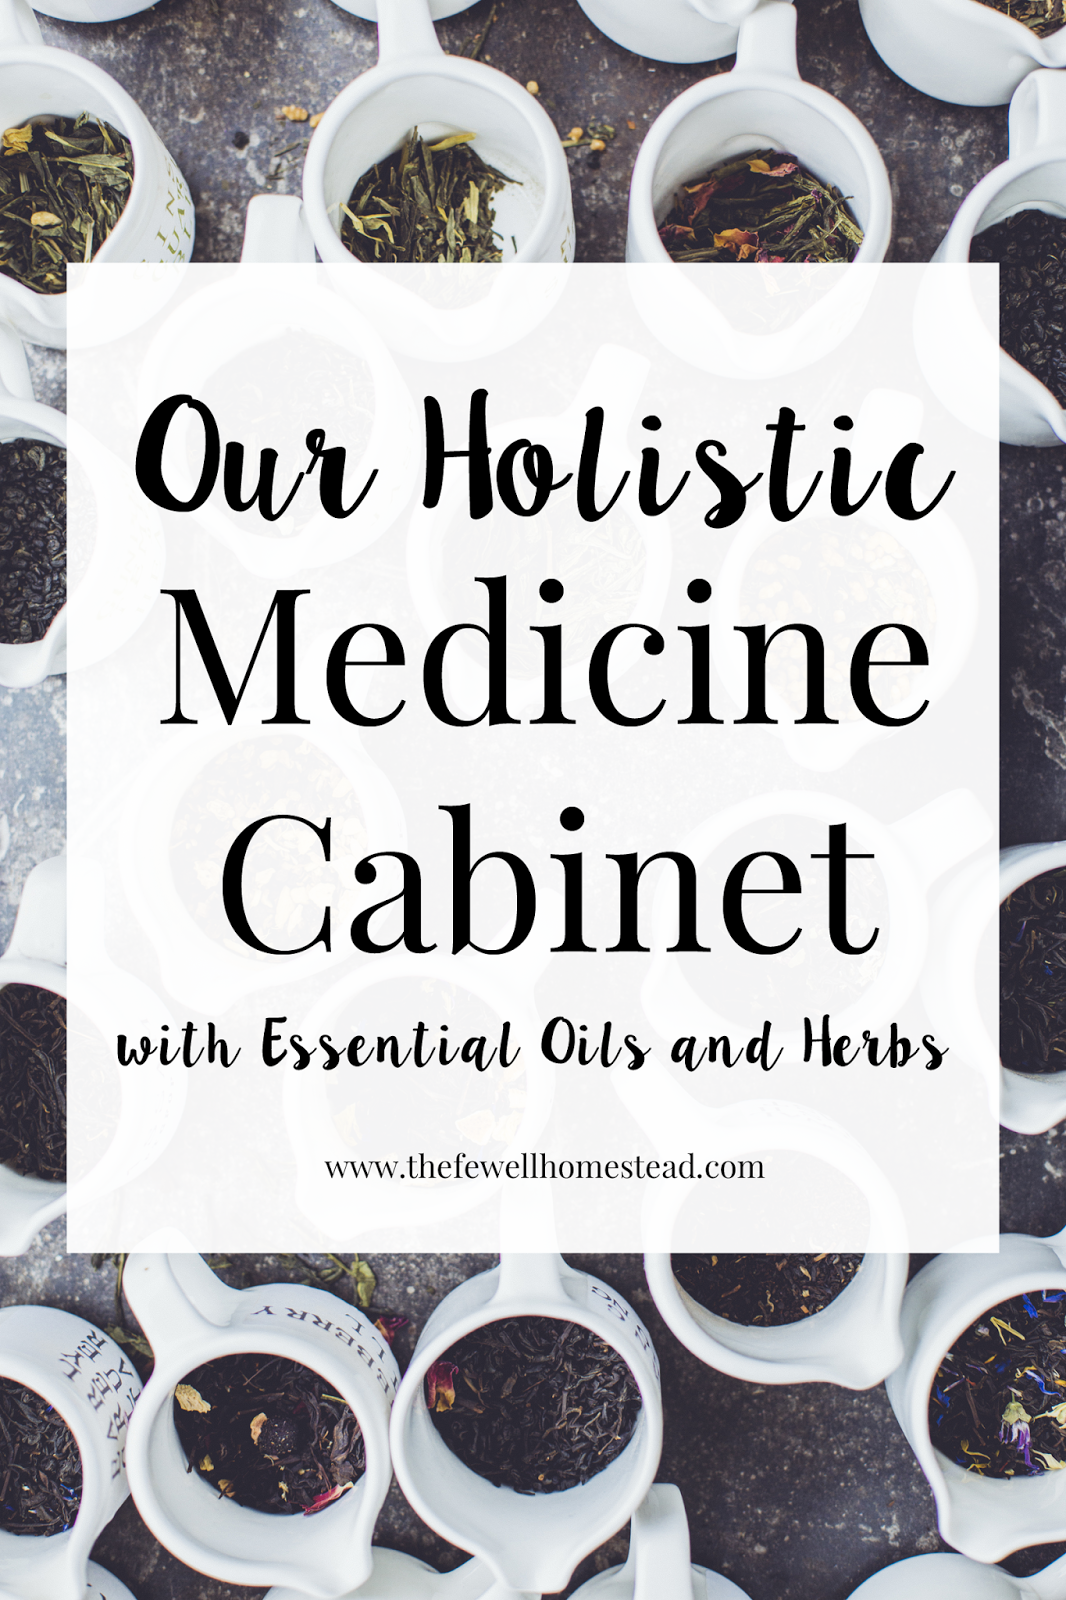 Our Holistic Remedies Cabinet, Essential Oils and Herbs - Amy K Fewell